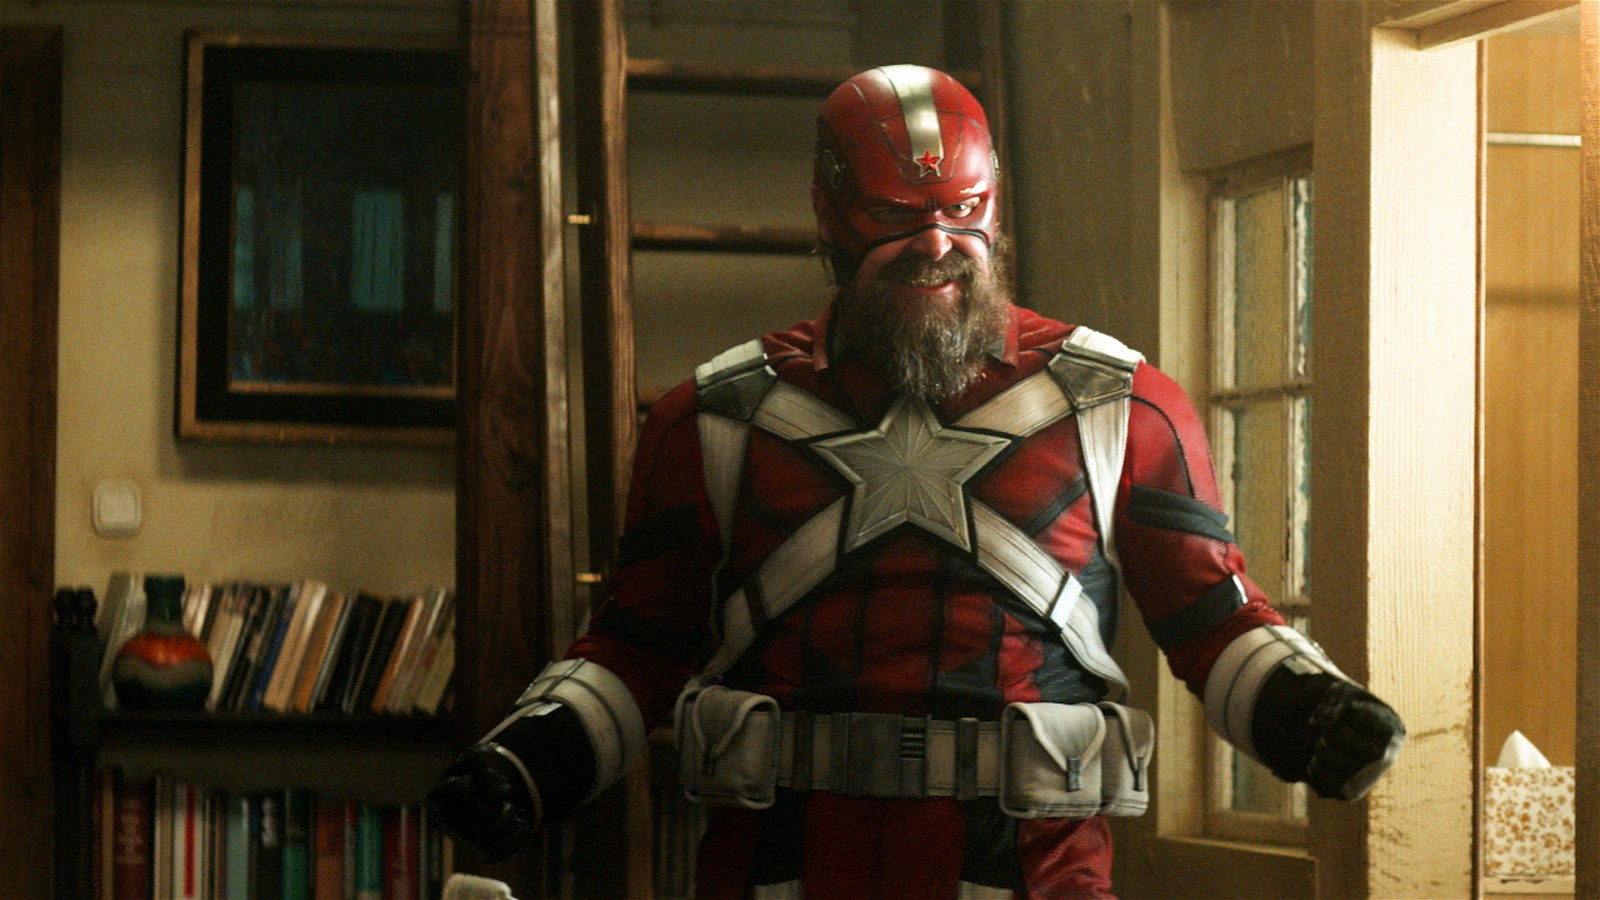 David Harbour as Red Guardian in a still from Black Widow